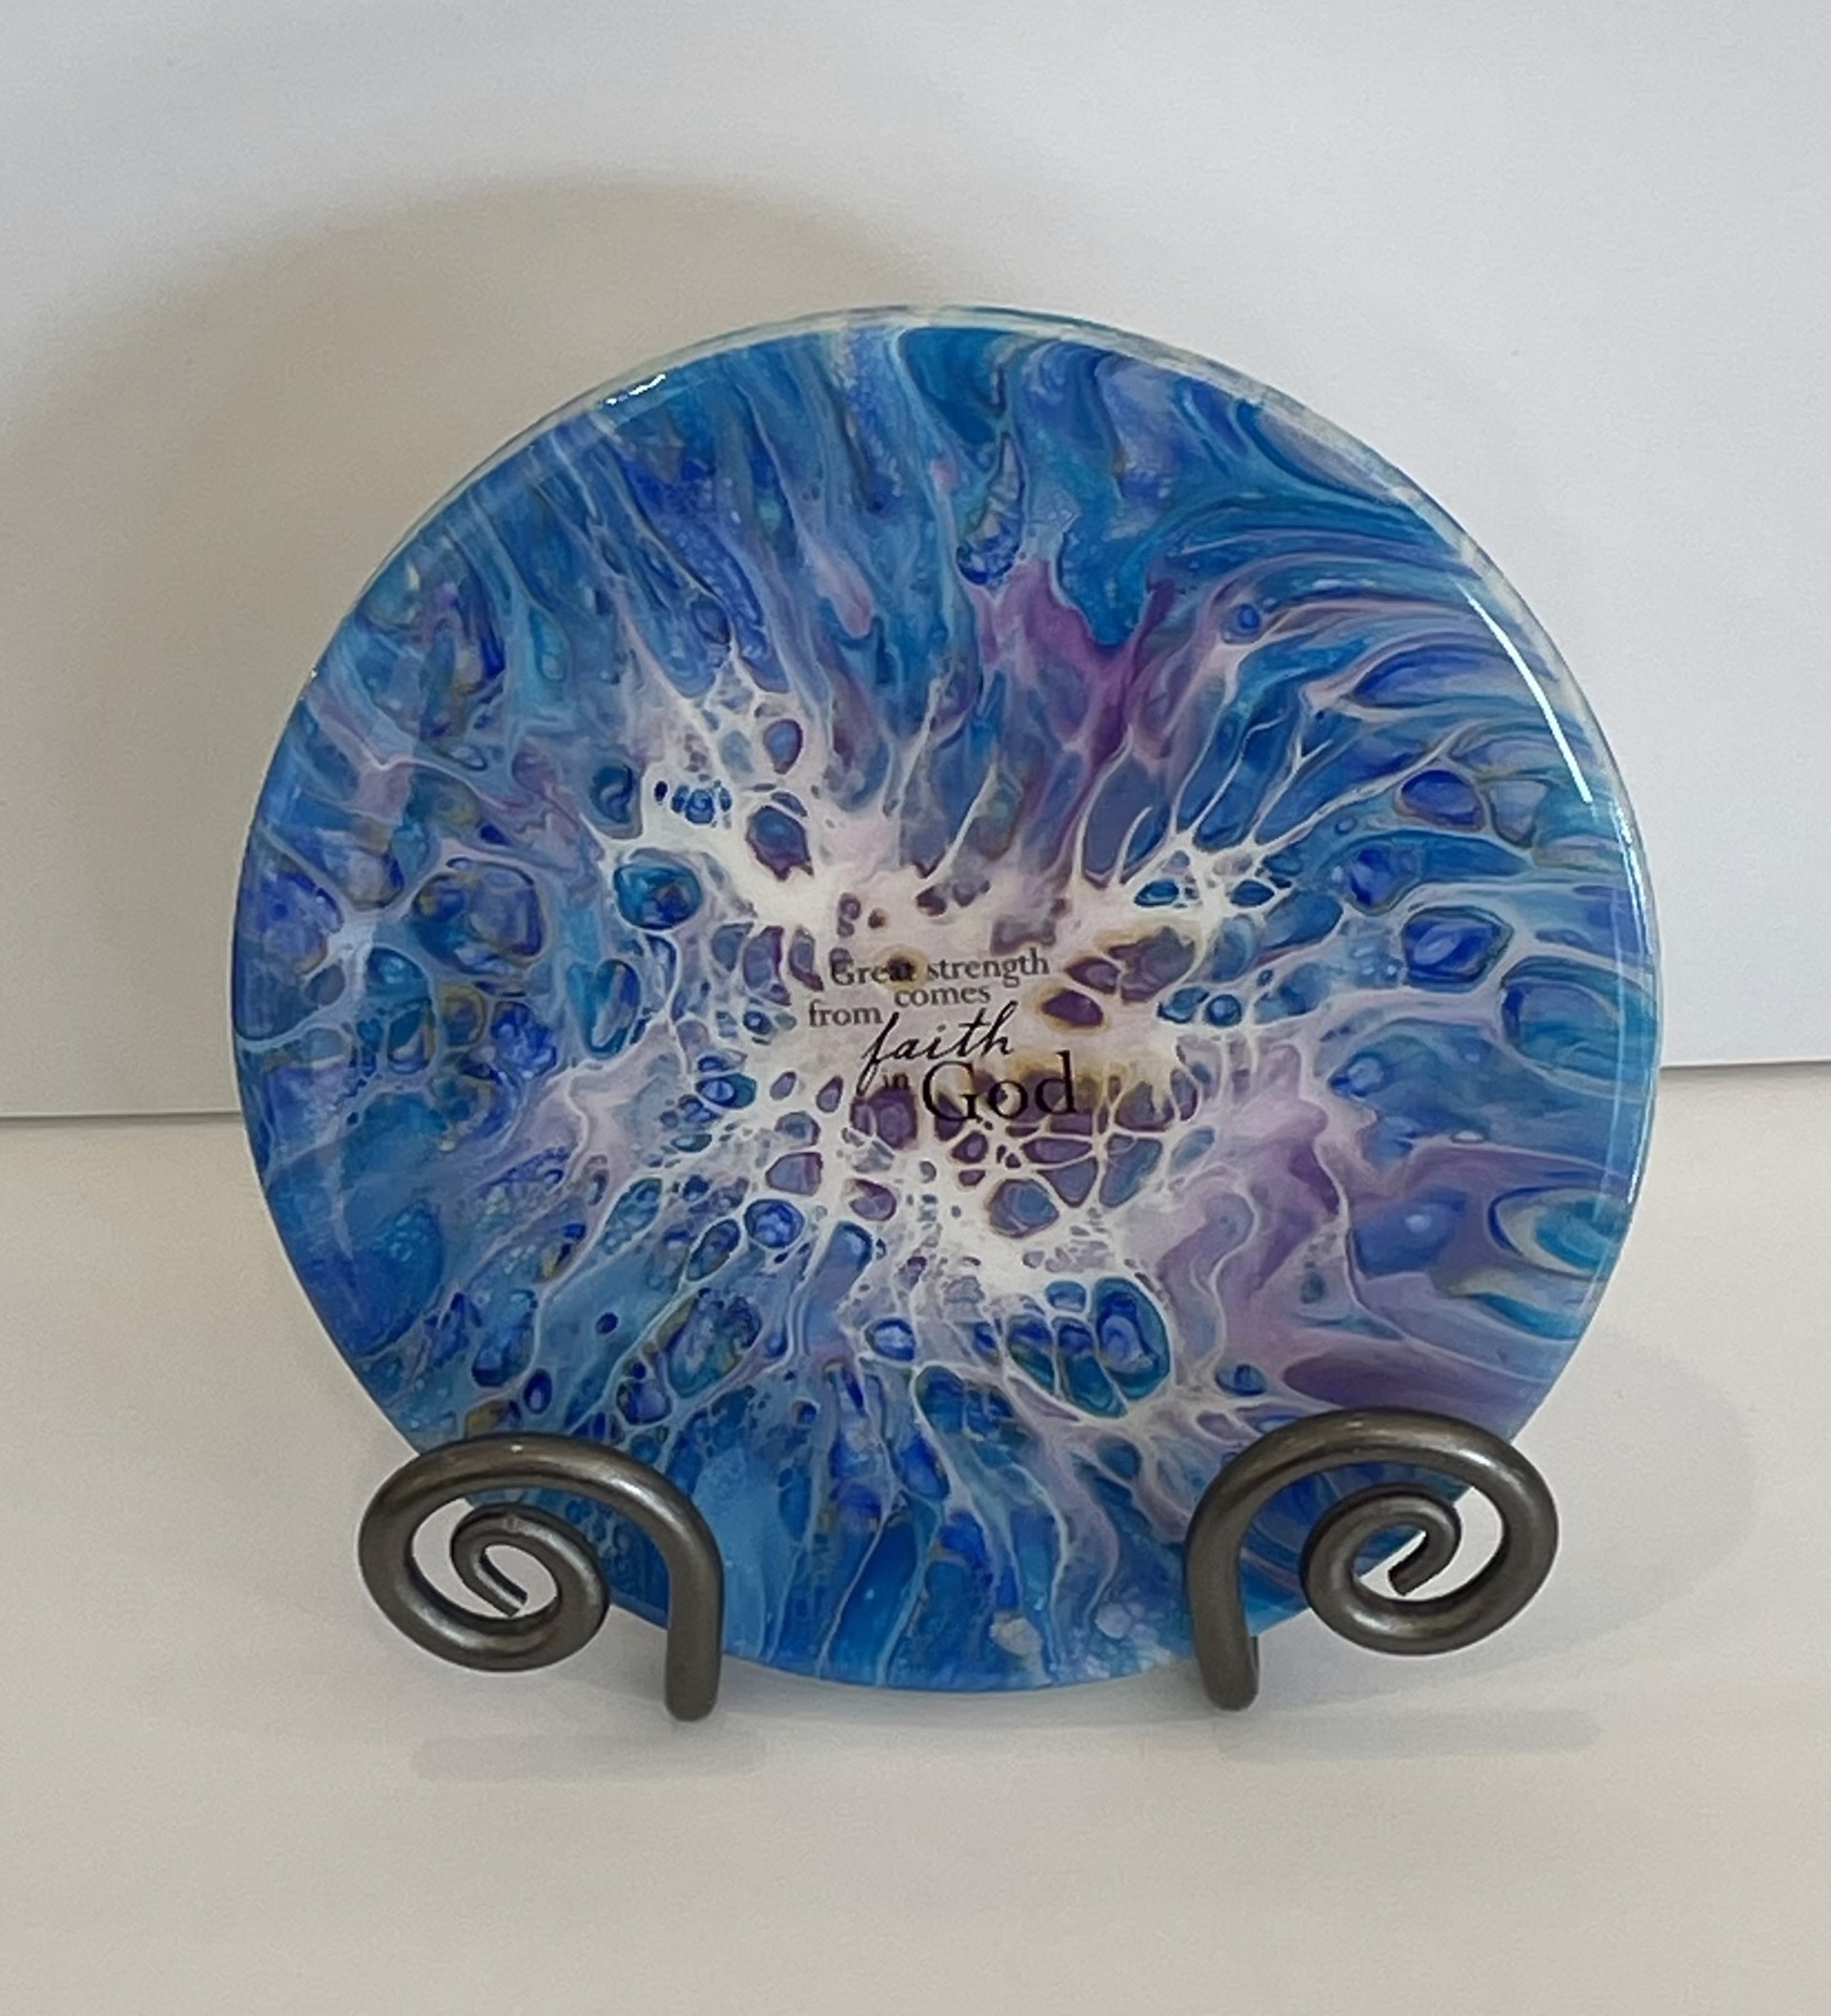 Resin Round Great Strength Comes From Faith by Alisa Butler